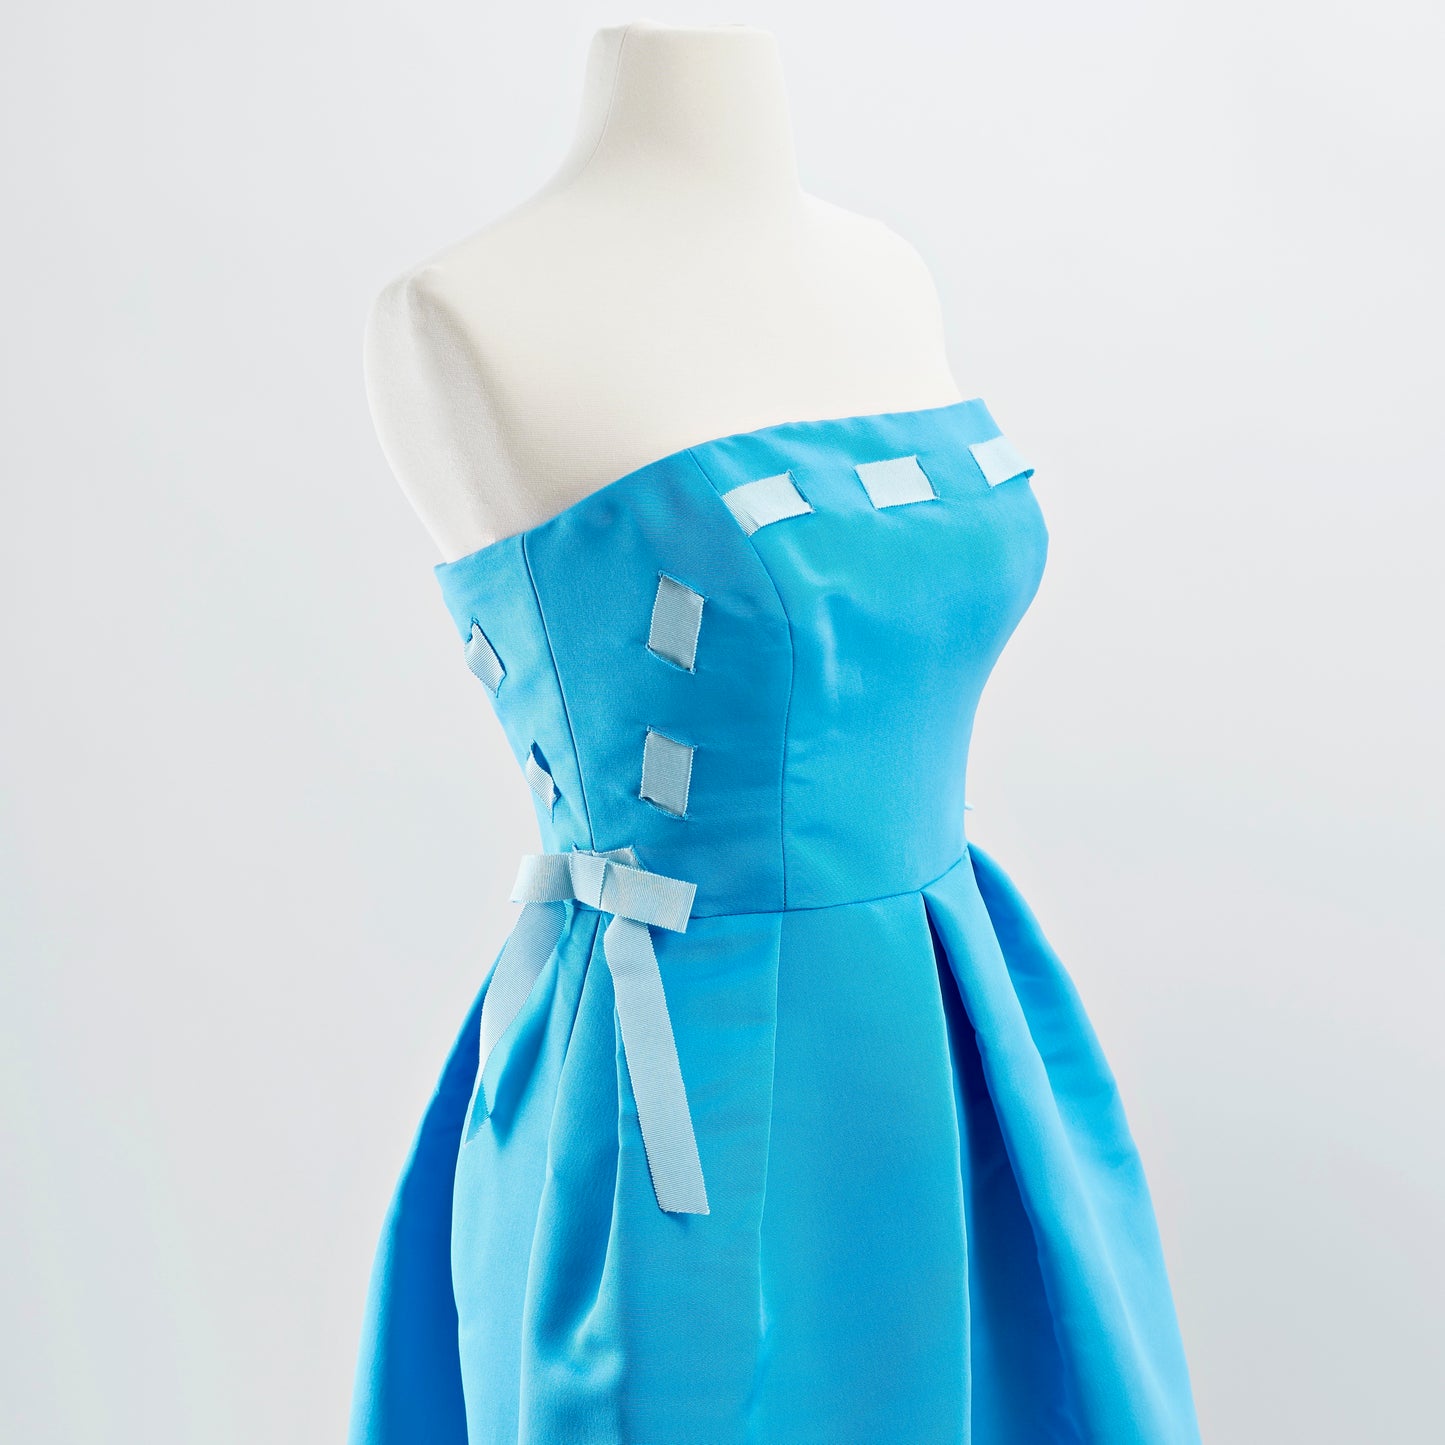 Detail shot of bodice of blue strapless silk faille cocktail dress with full skirt and light blue woven ribbon detail and bows at waist